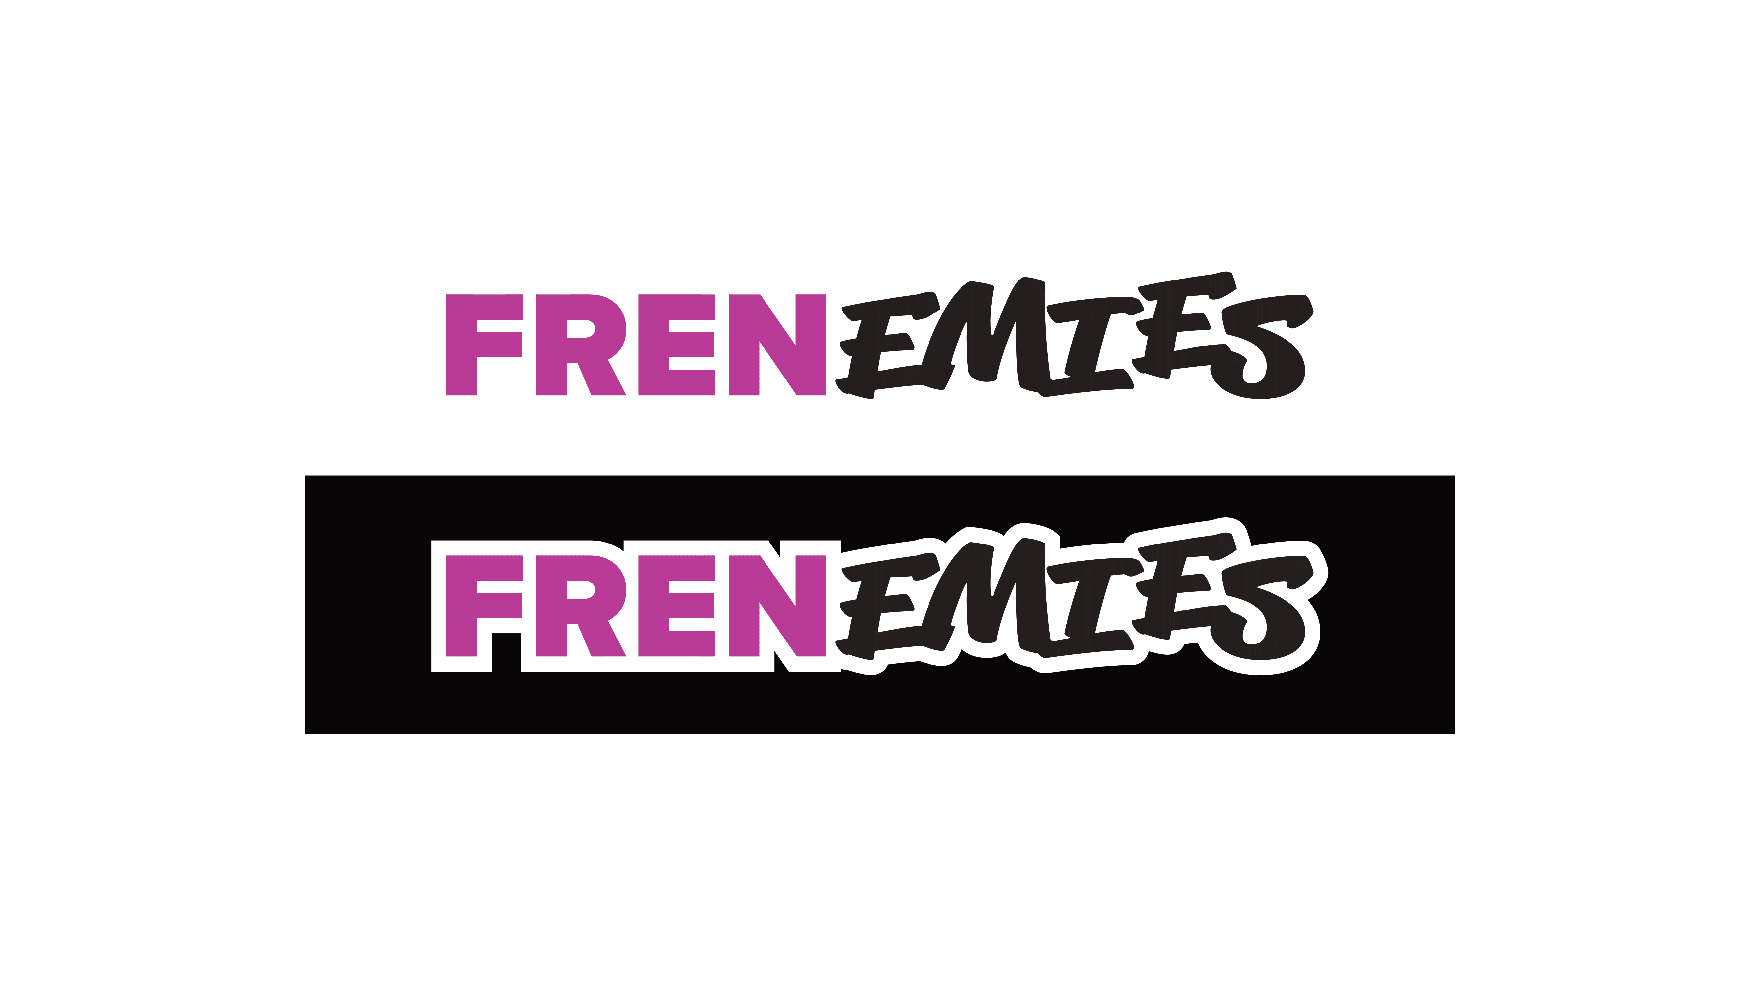 A contrast test for Frenemies' new logo